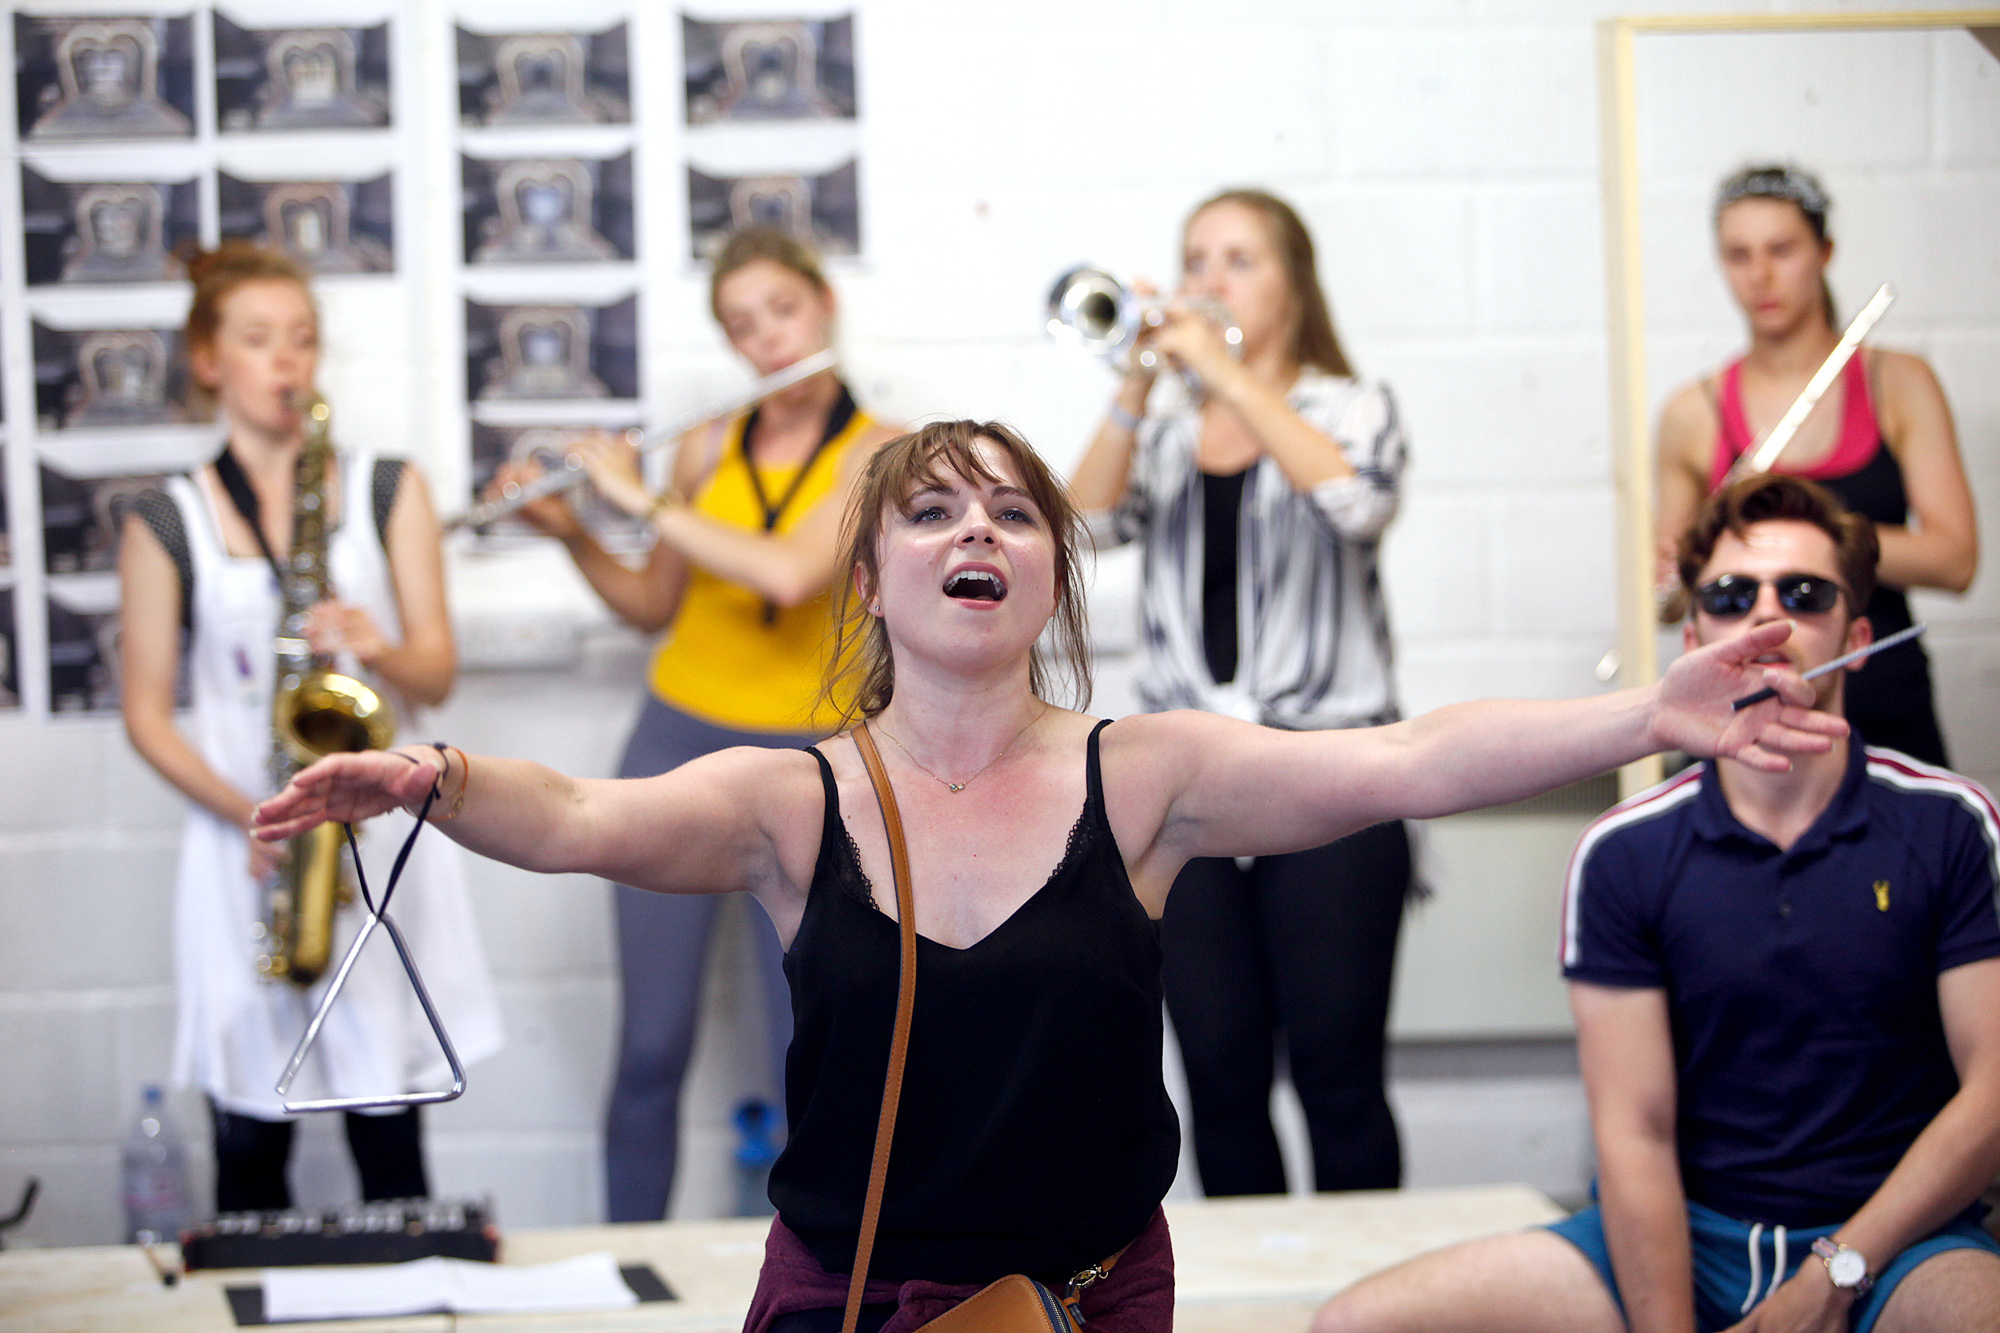 A photograph of Sweet Charities rehearsal. Female has arms outstretched while singing.